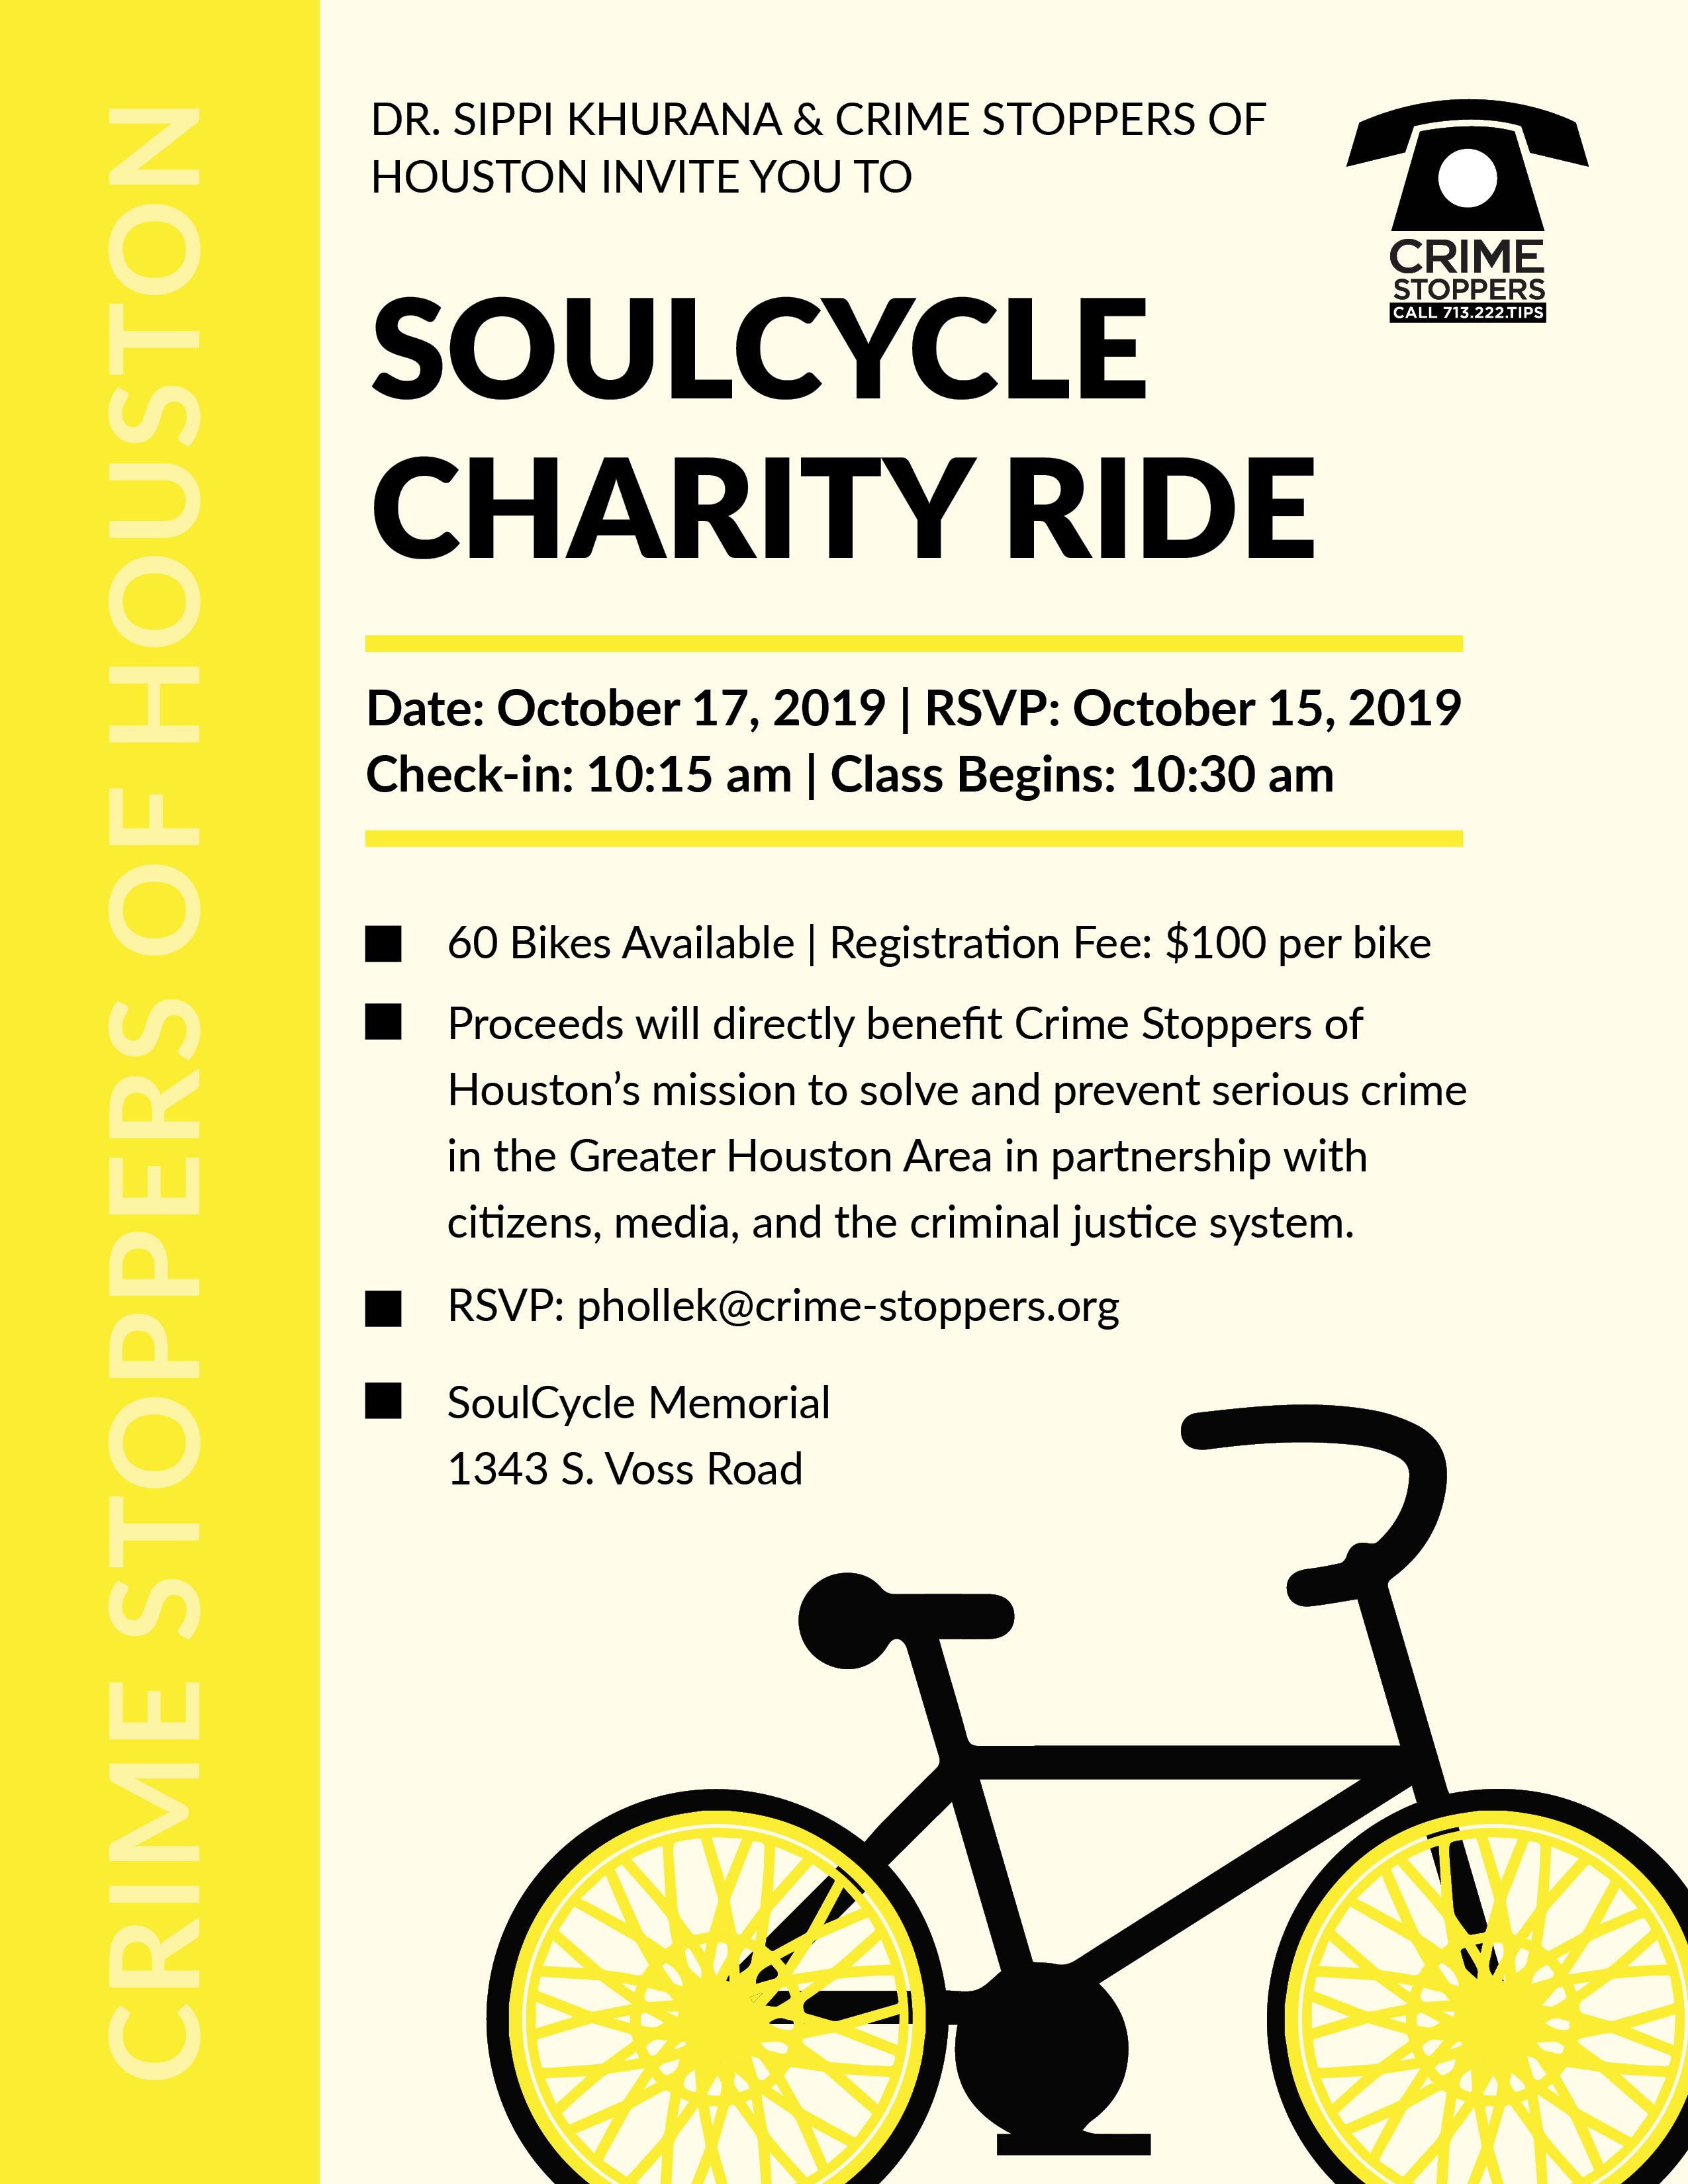 SoulCycle CS Charity Ride 10.17.19 Houston Crime Stoppers